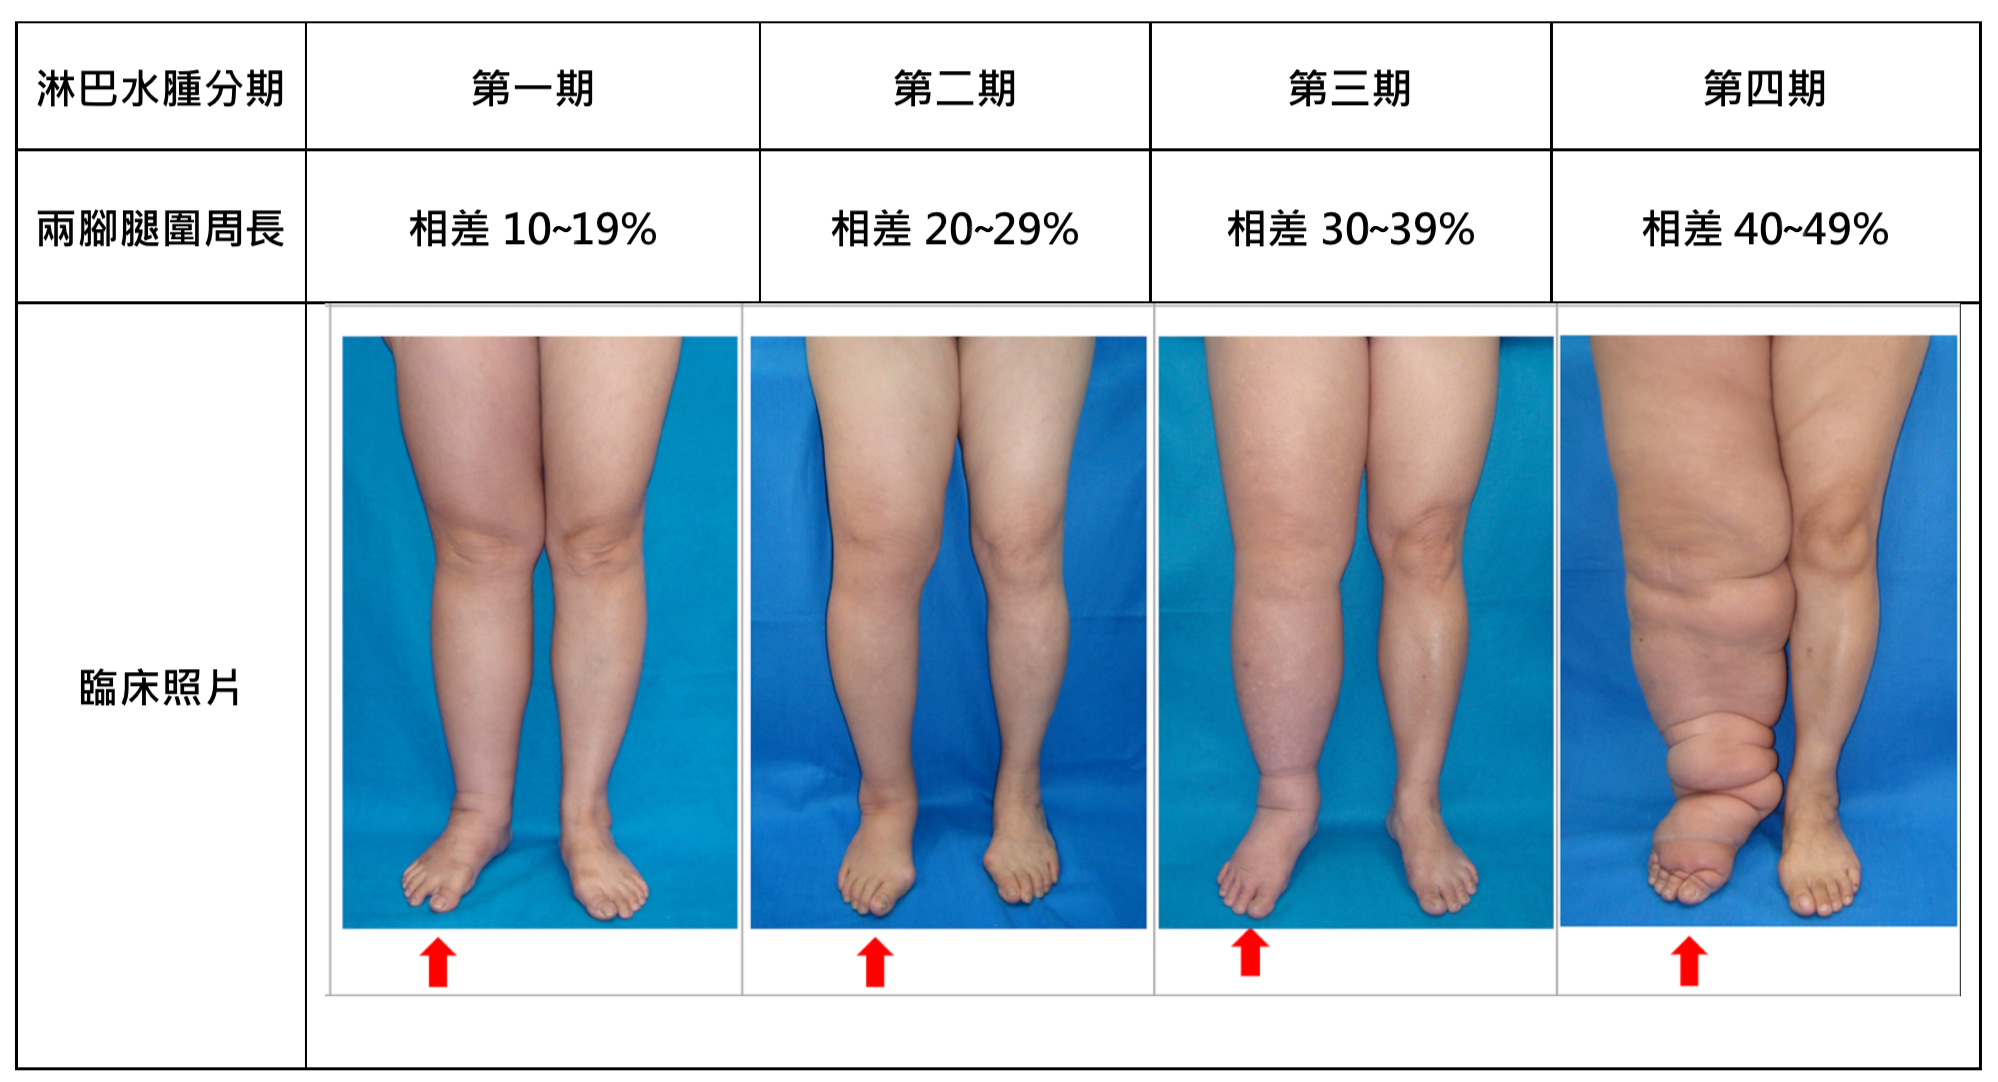 Lymphedema Grading Systems - Before Treatment photos - patients legs